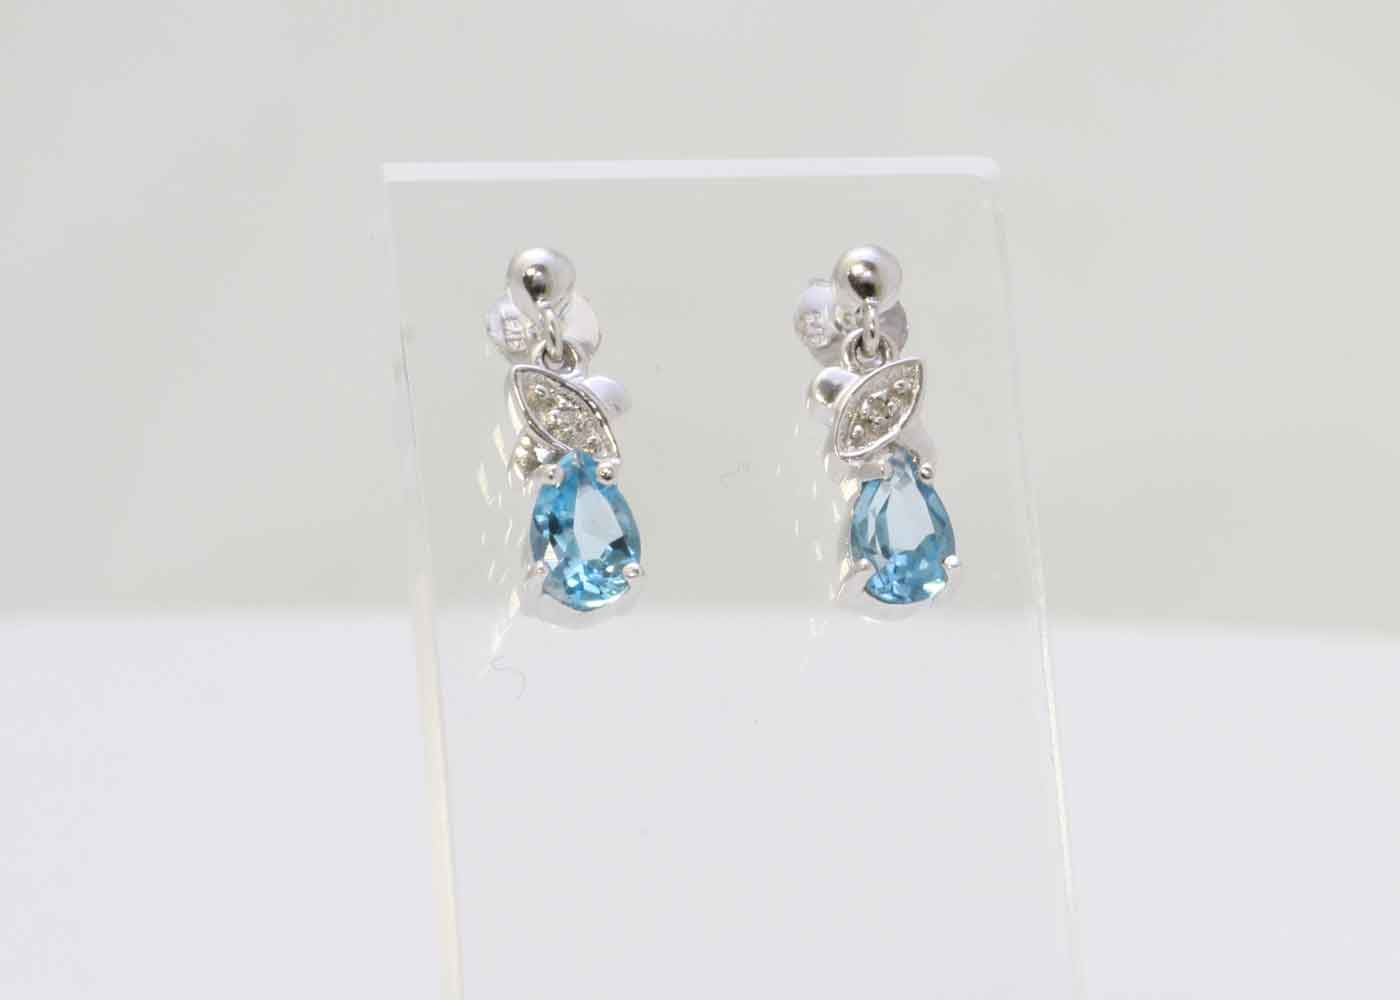 9ct White Gold Diamond And Blue Topaz Earrings - Image 3 of 4